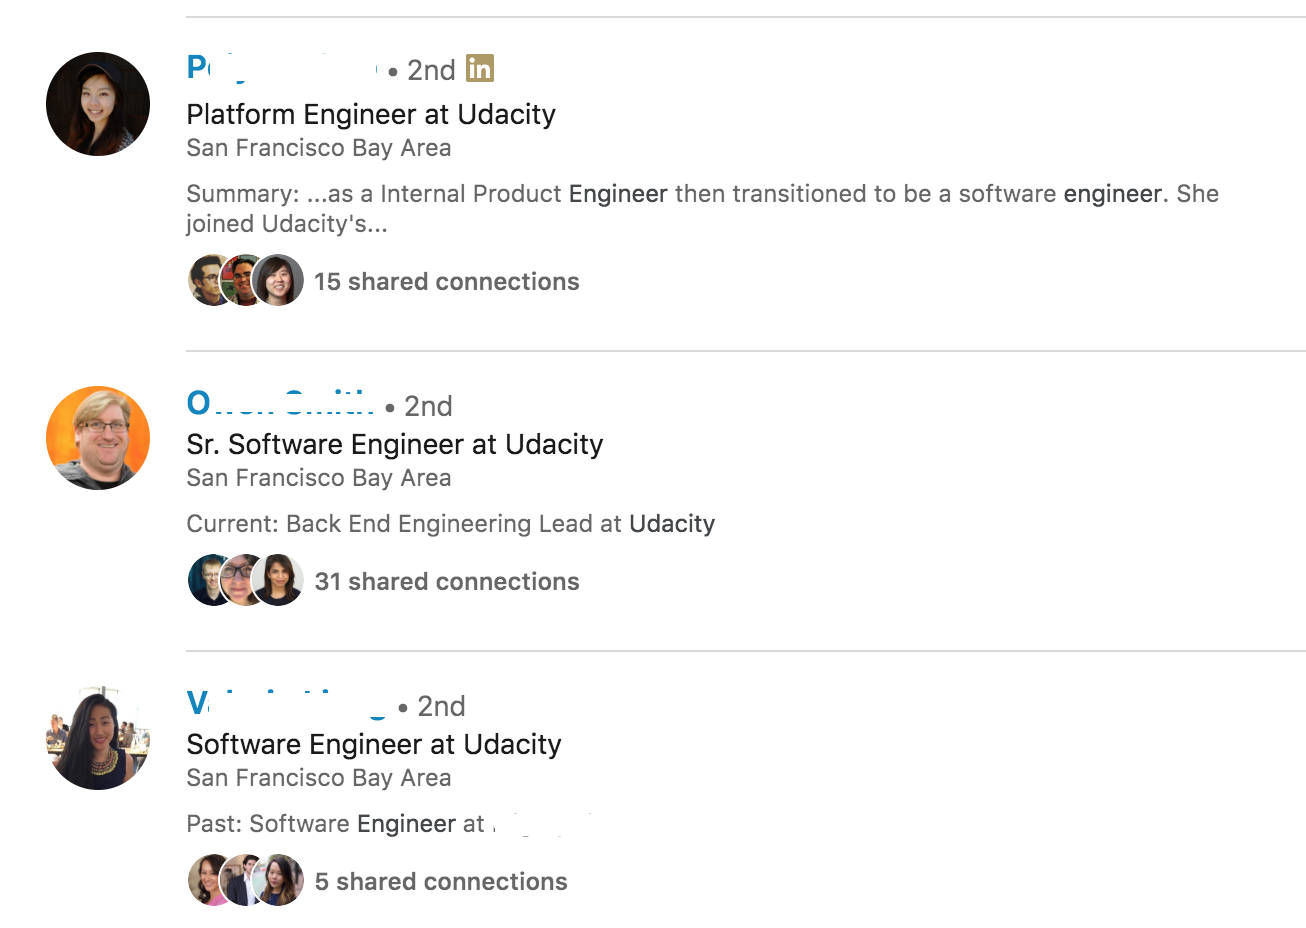 LinkedIn search results for "Udacity software engineer" (with some redacted information)